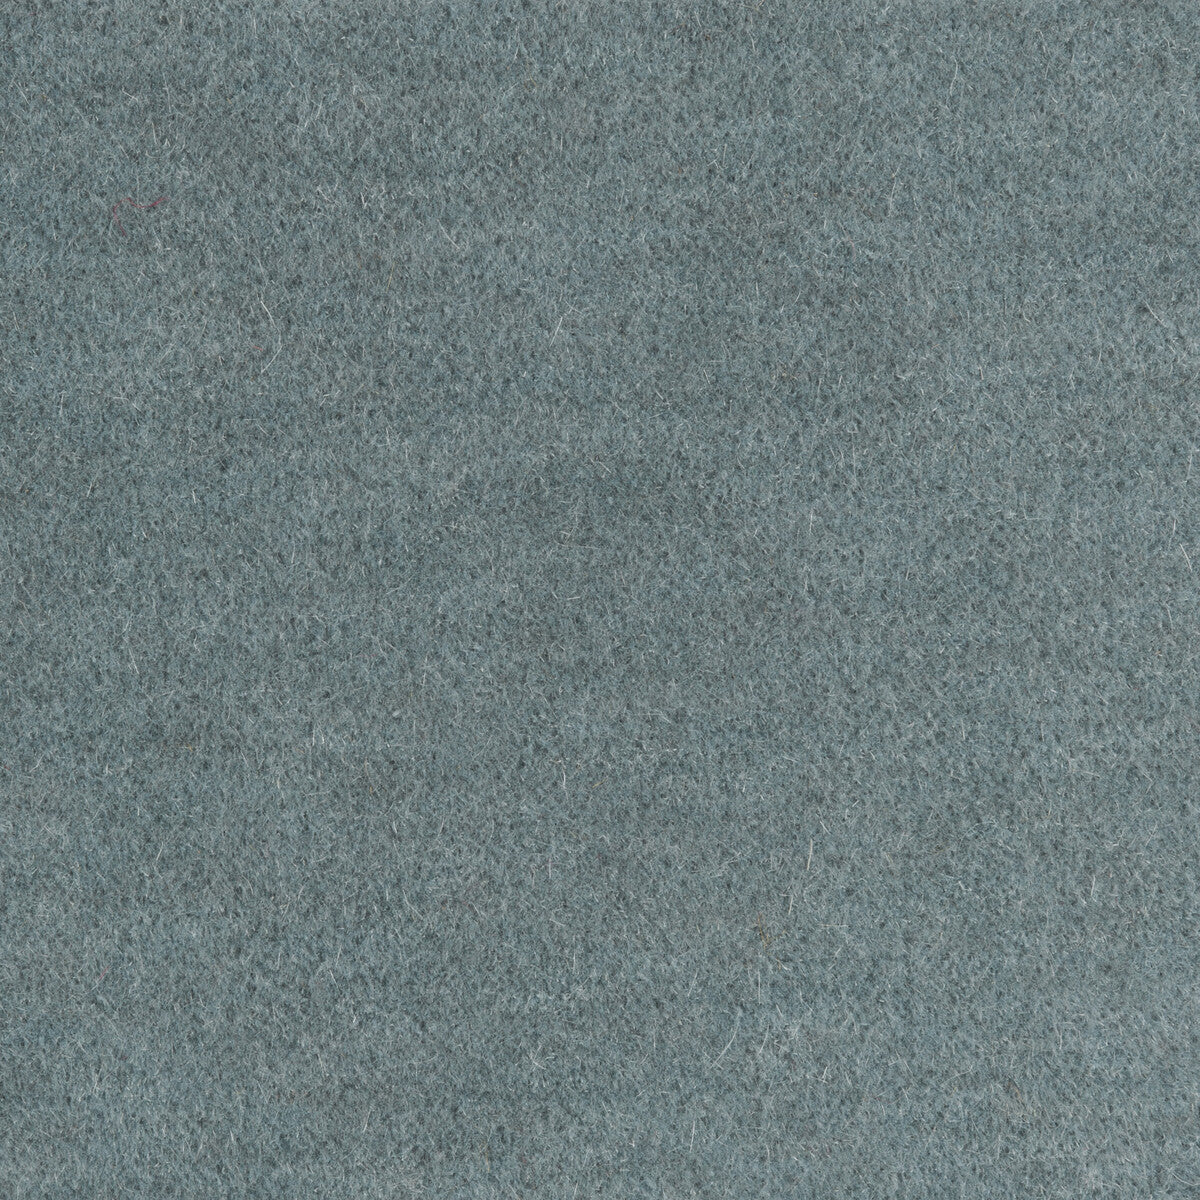 Bachelor Mohair fabric in glacier color - pattern 8014101.1515.0 - by Brunschwig &amp; Fils